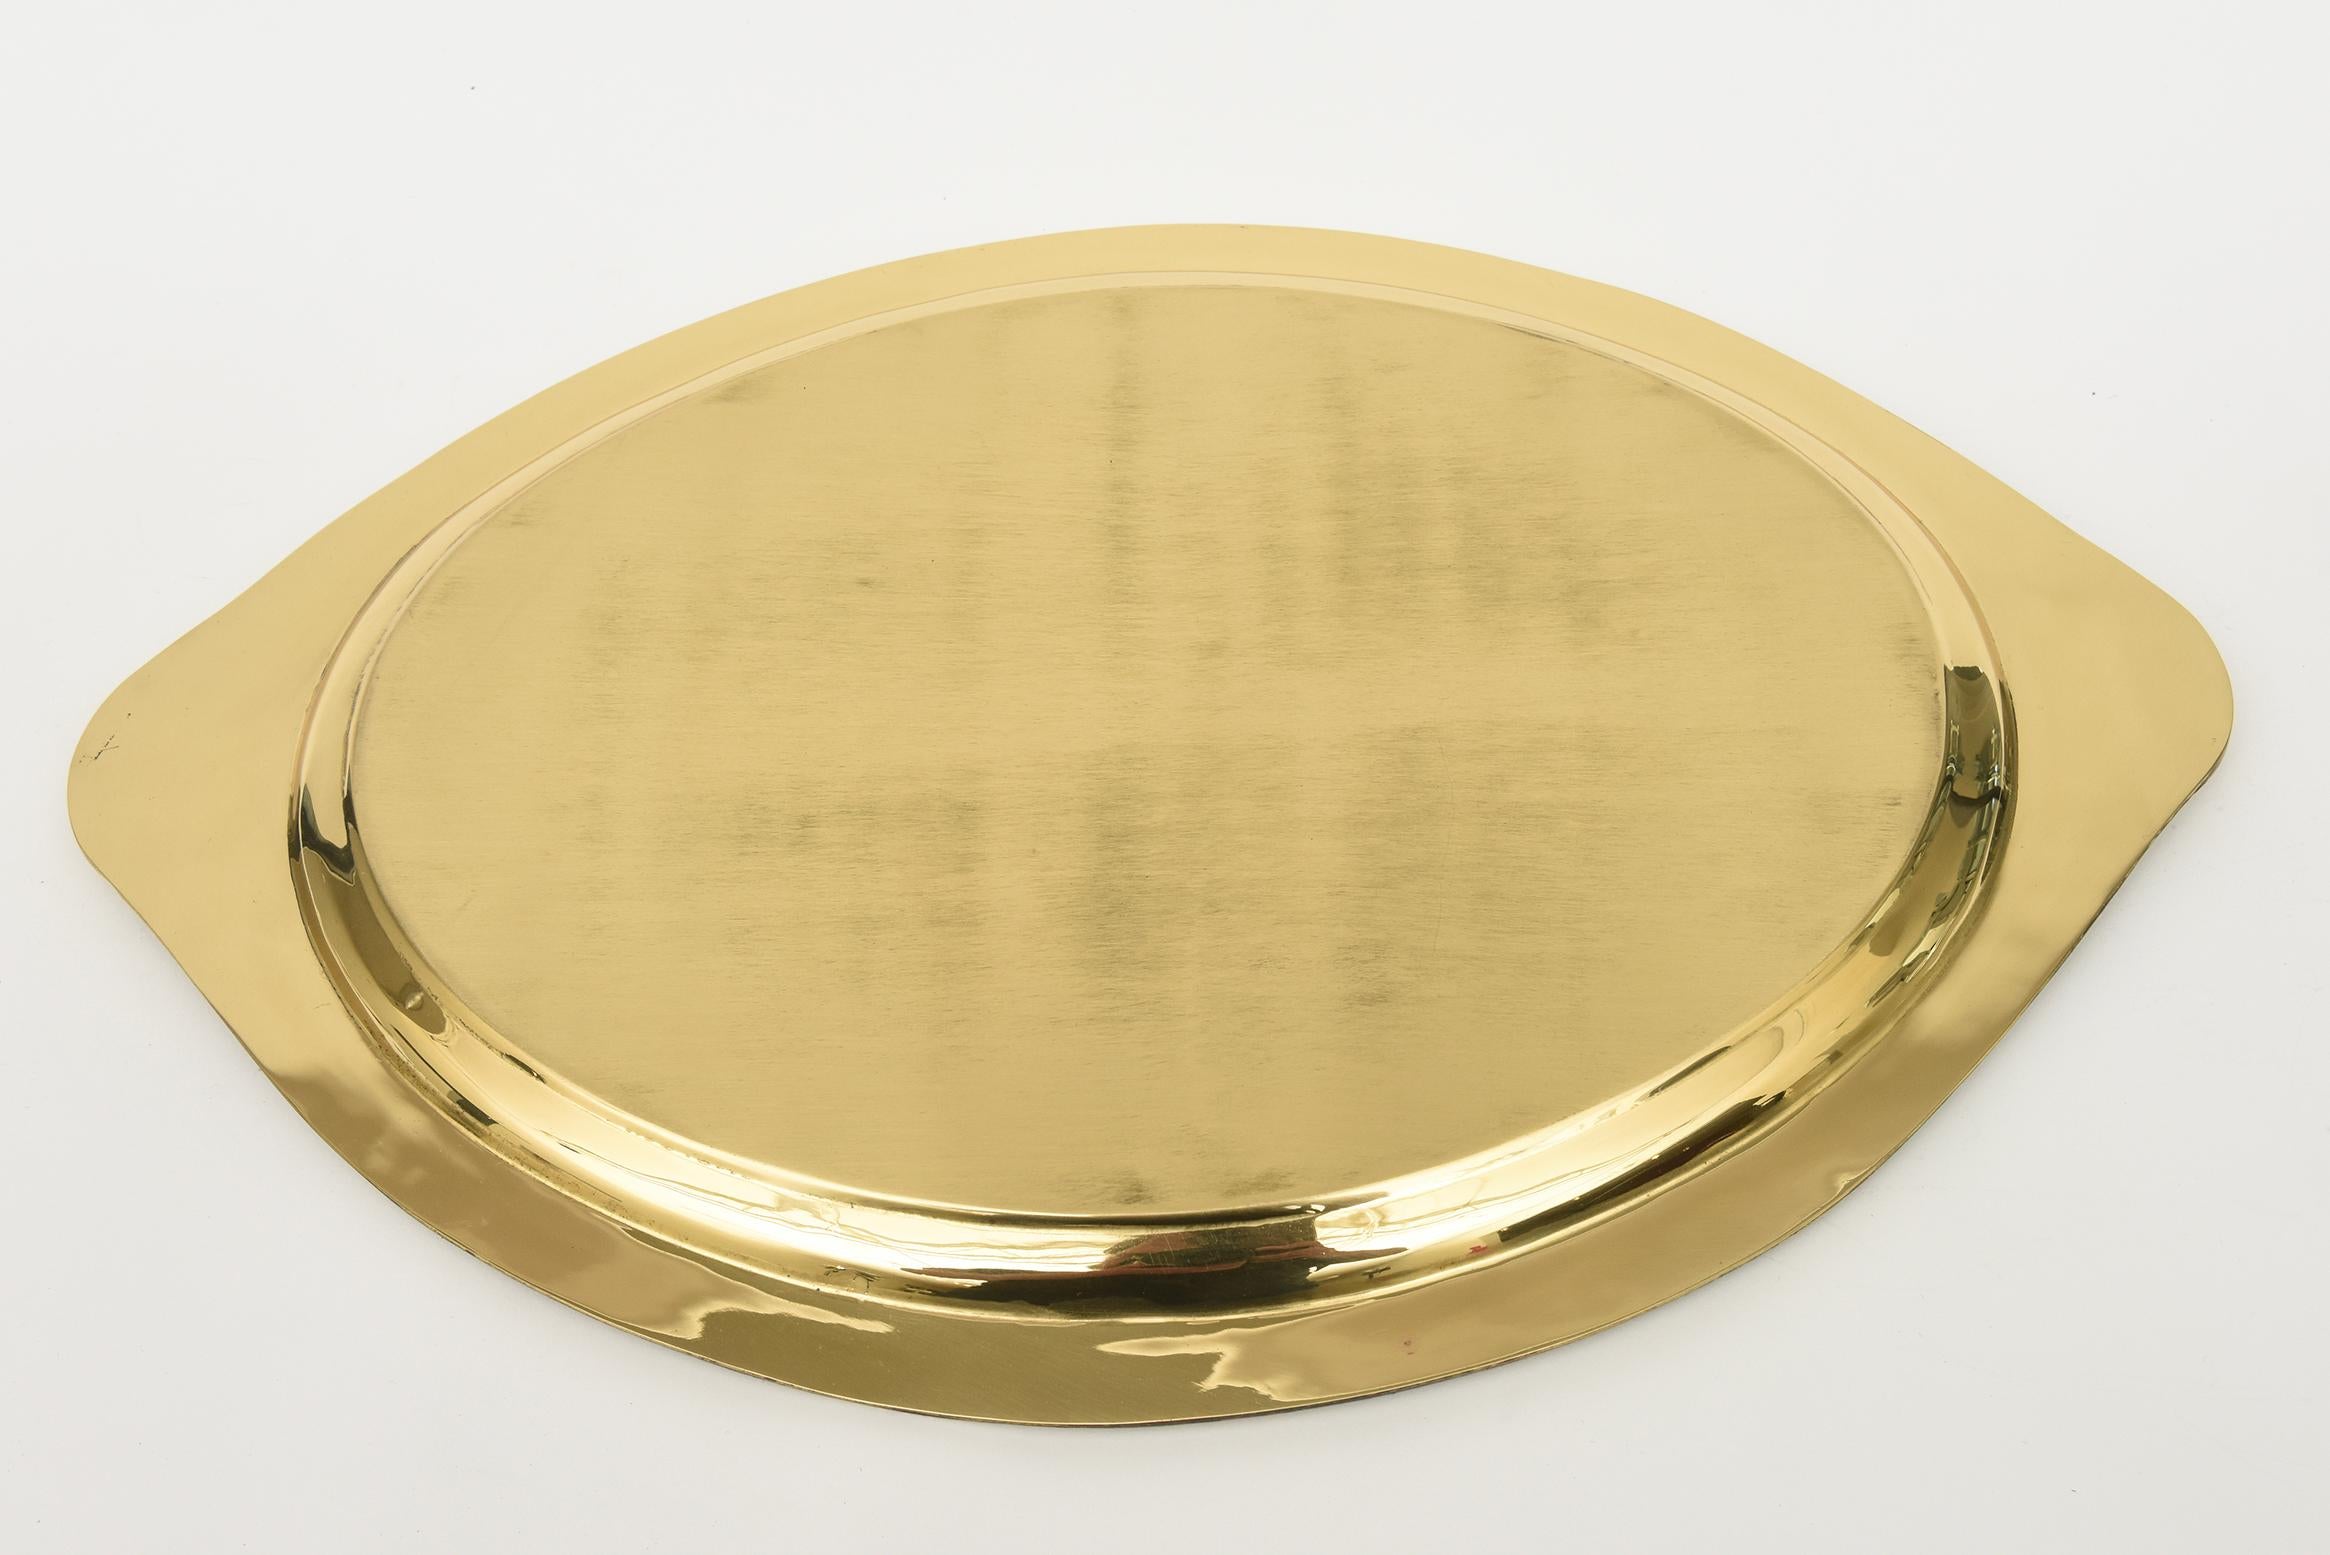 Vintage Brass Oval Tray With Shell Design Barware For Sale 4